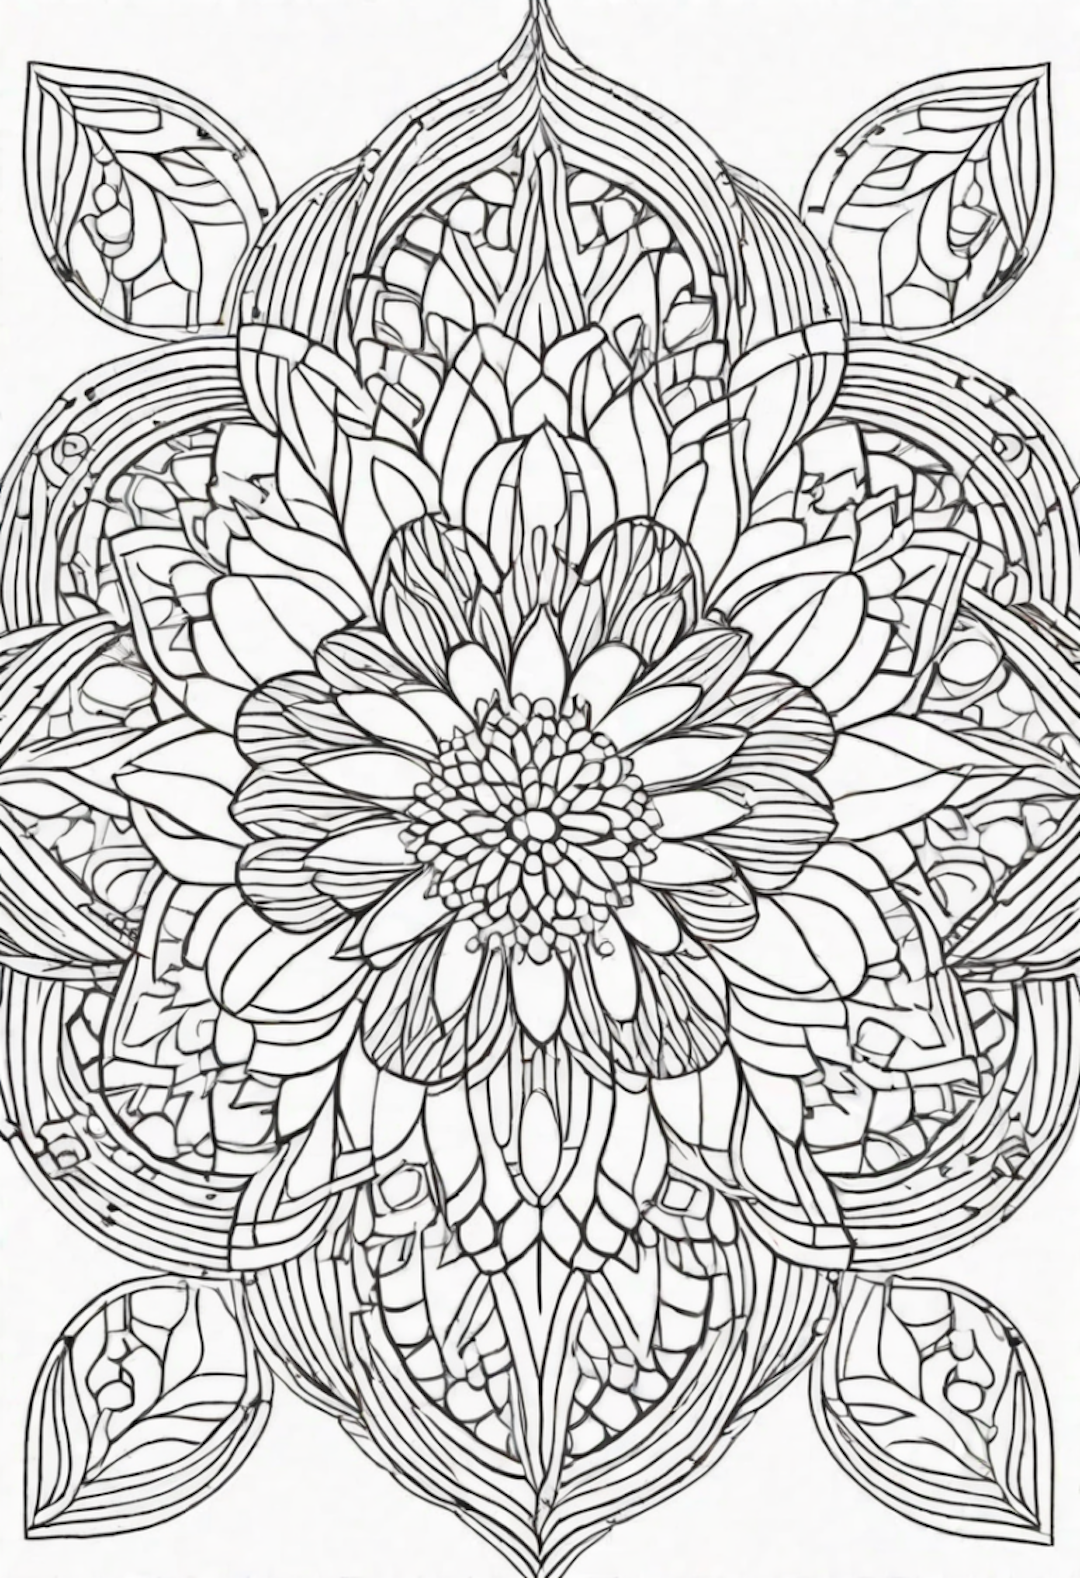 Mandala Blossom Coloring Page coloring pages